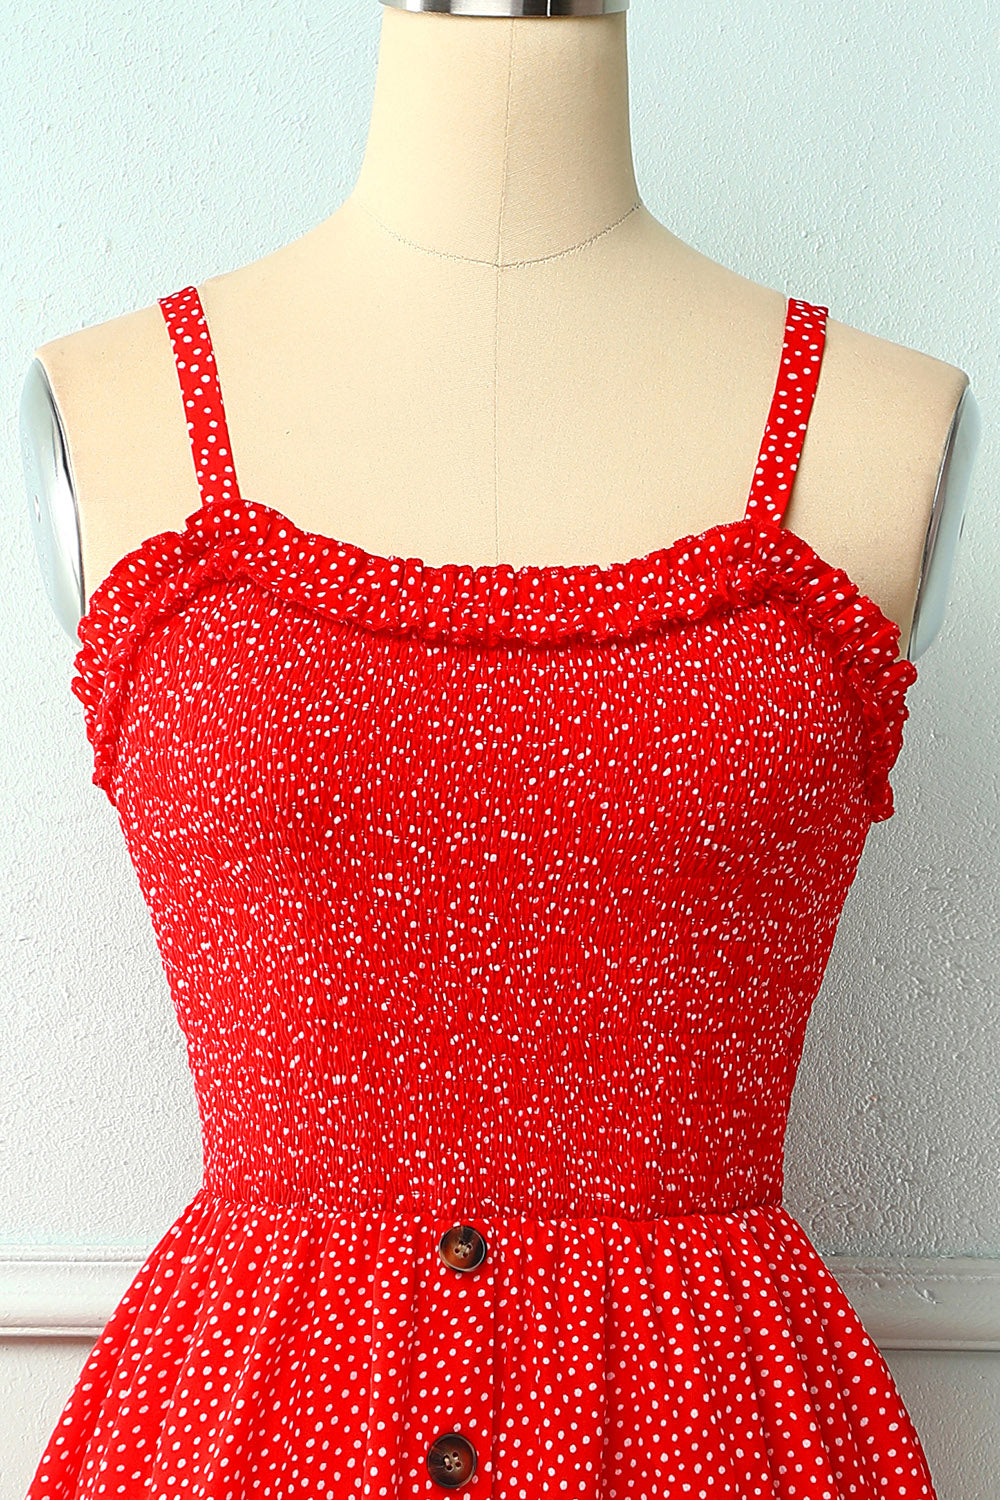 Vintage Red Floral Dress With Button